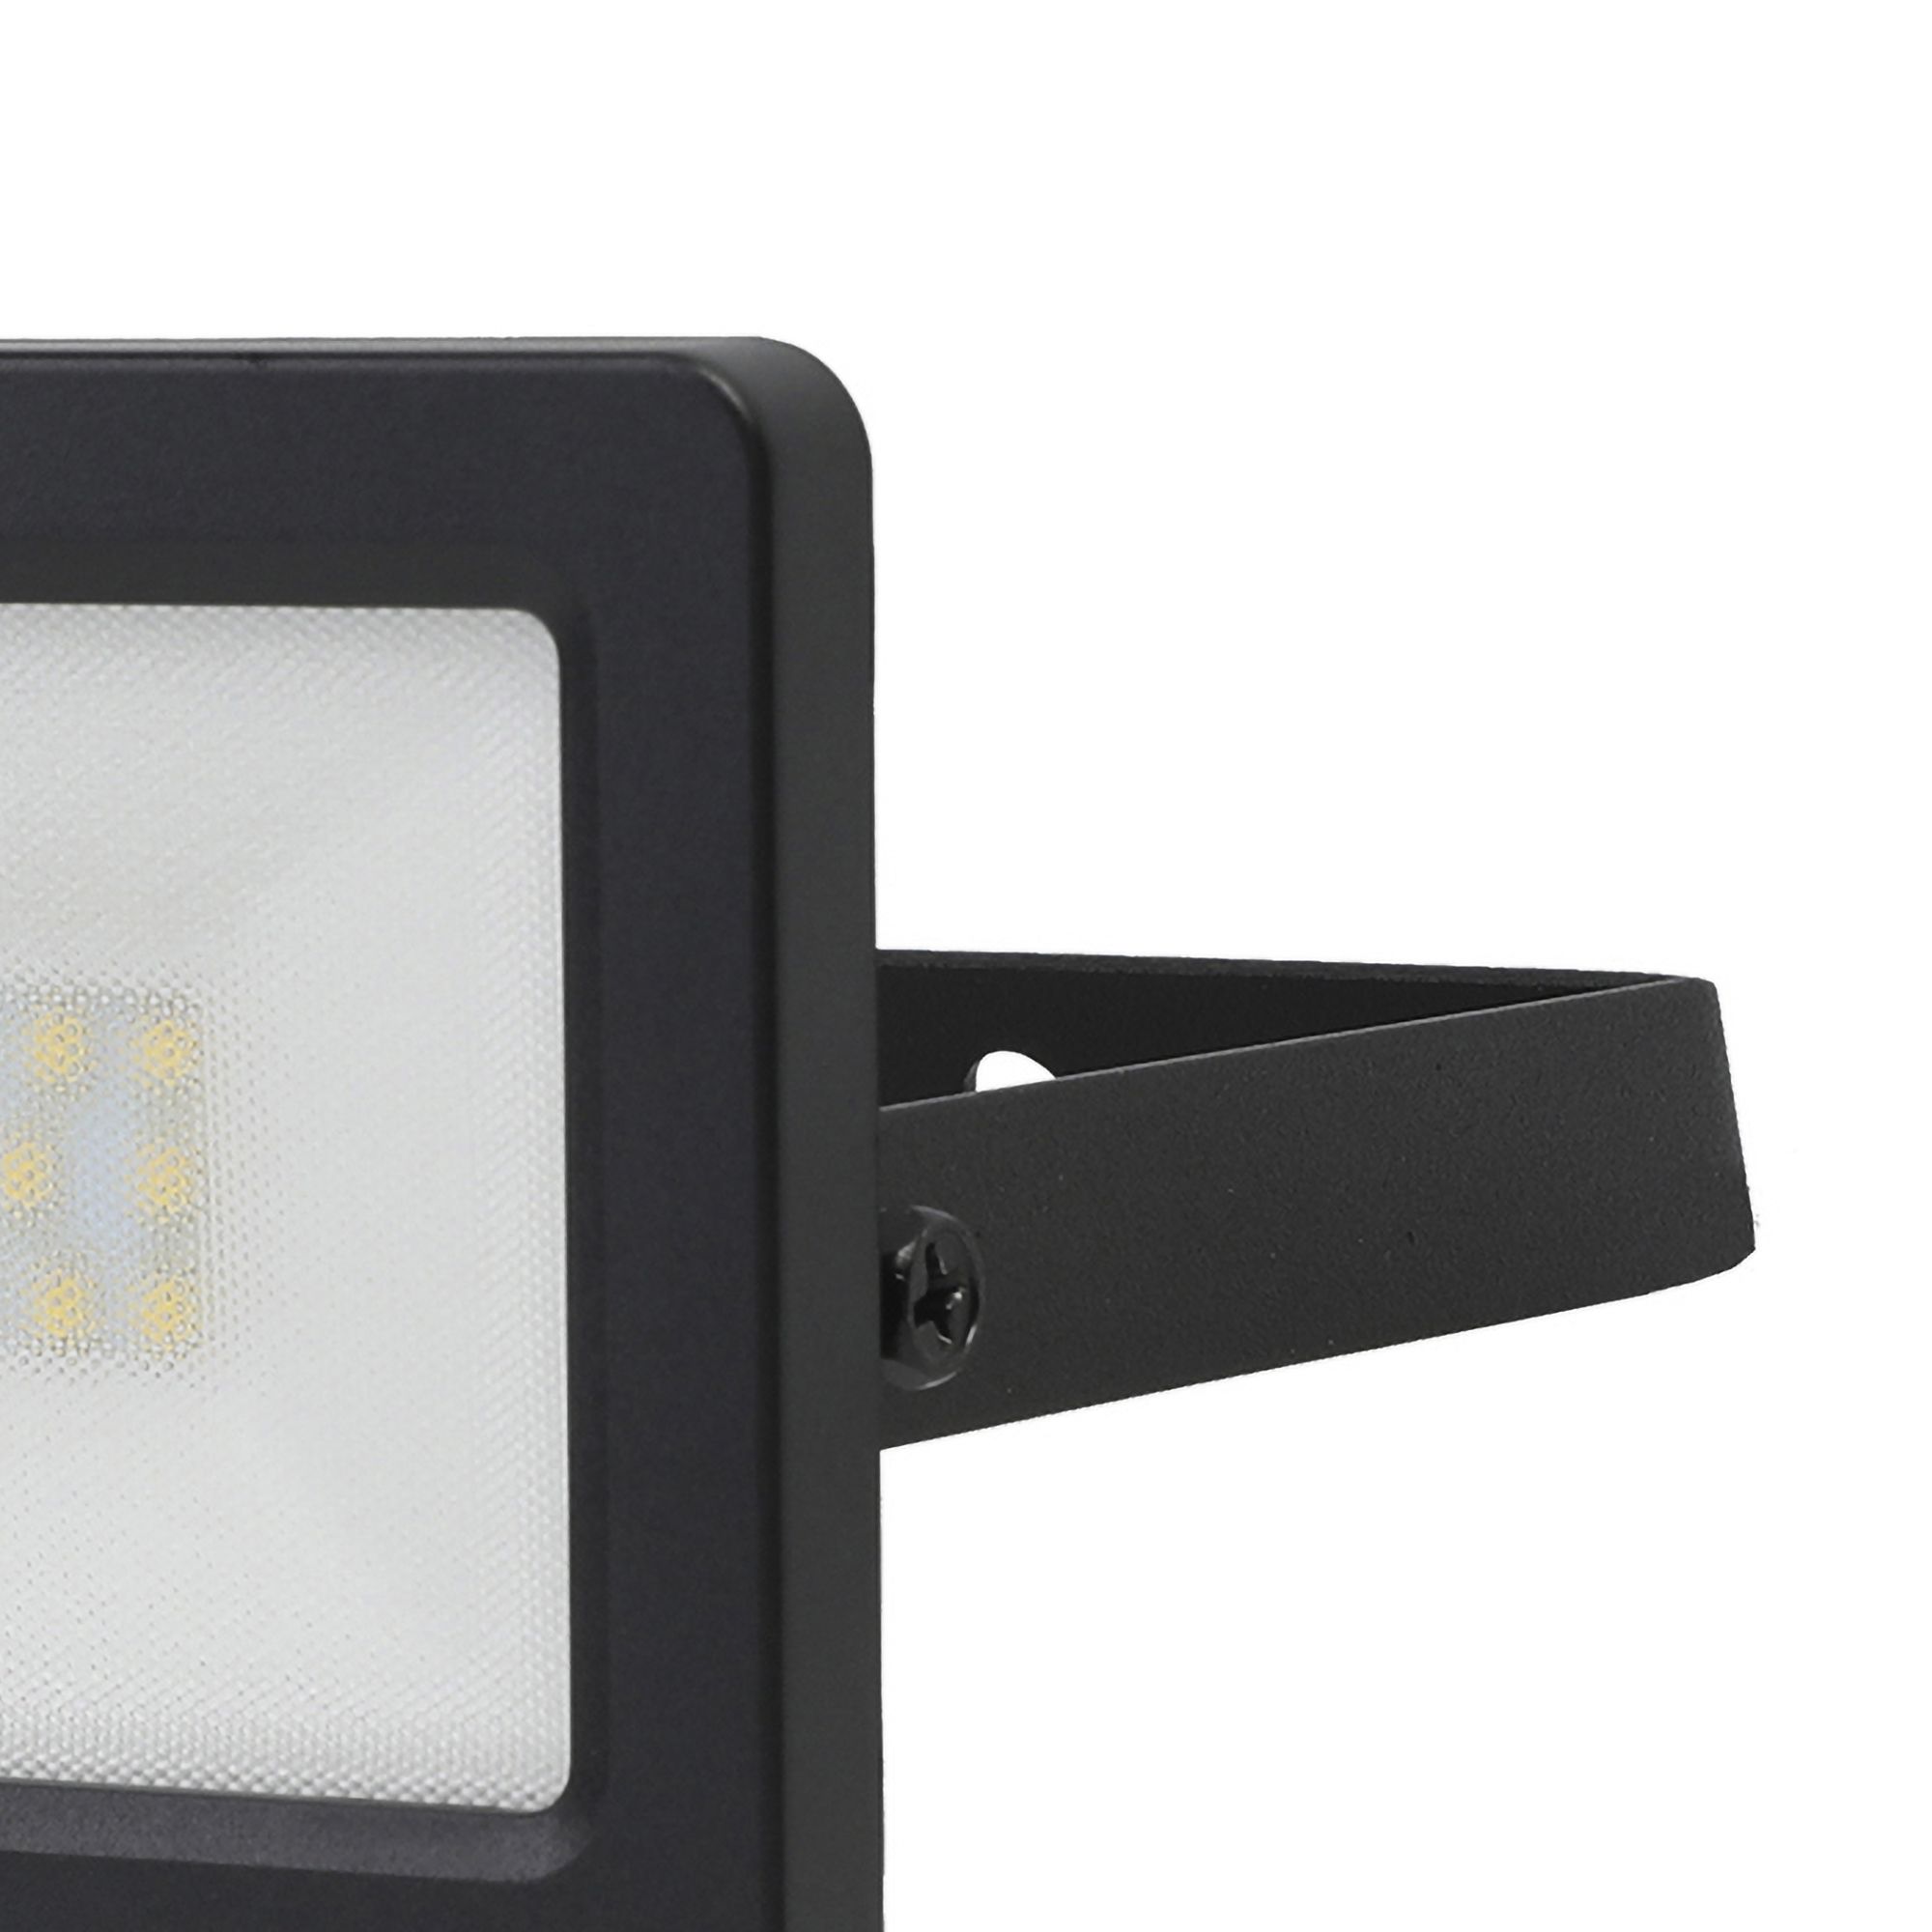 GoodHome Lucan AFD1017-IB Black Mains-powered Cool white Outdoor LED PIR Floodlight 1000lm